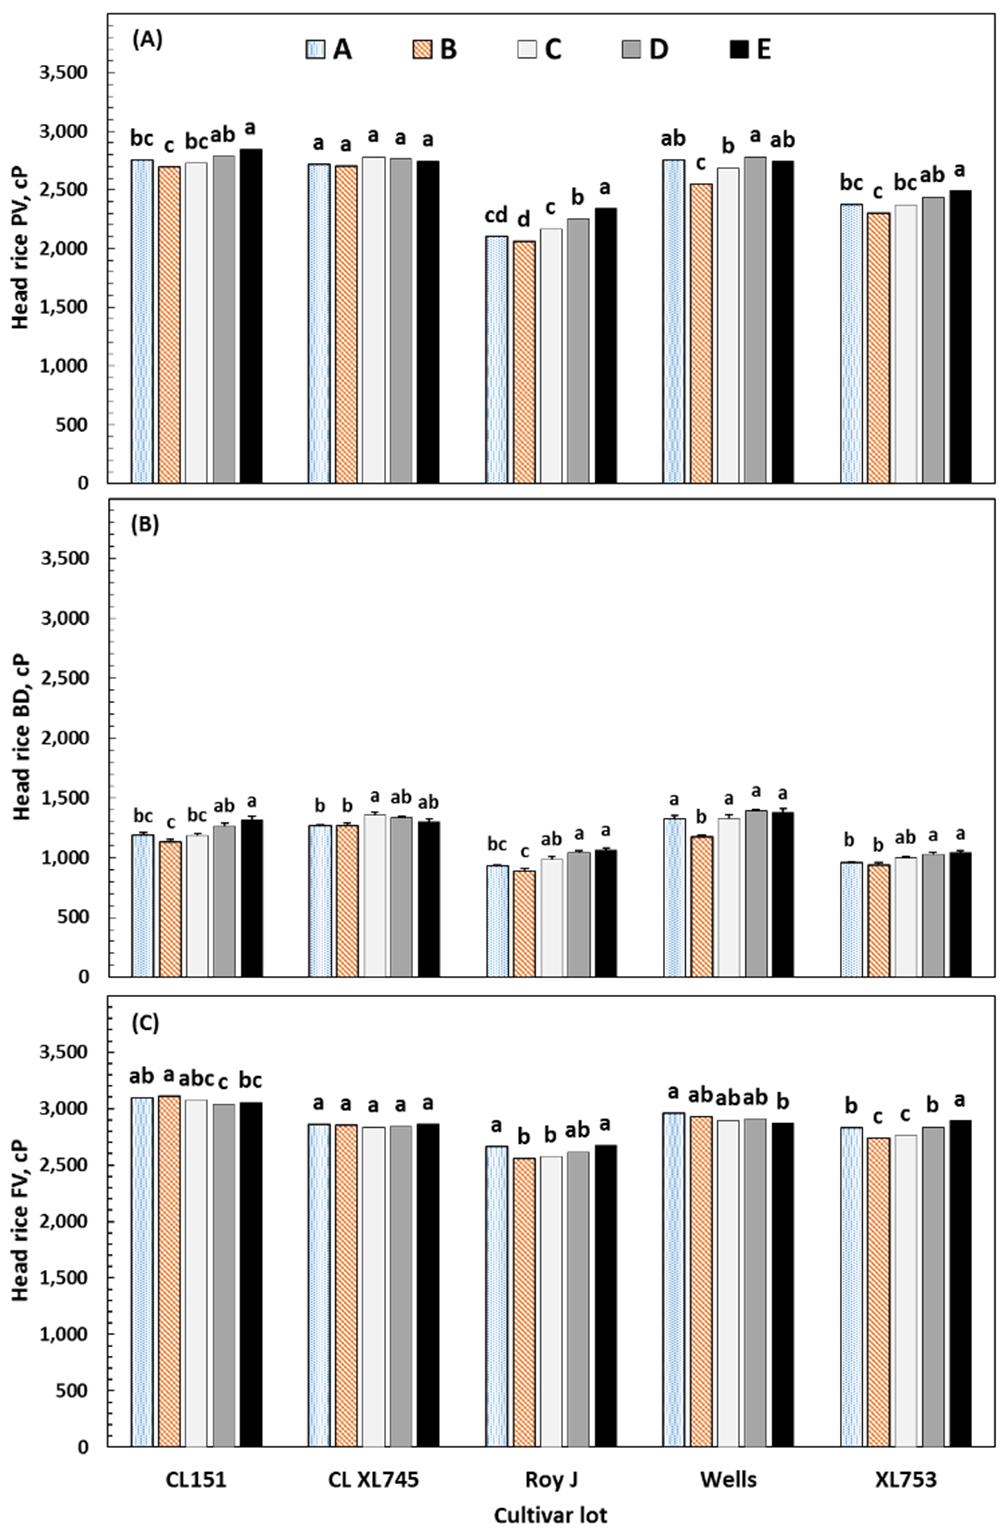 of any cultivar lot, suggesting that the greater differences observed with brown rice CP across thickness fractions resulted from CP within the bran layer and germ, which are removed during milling.